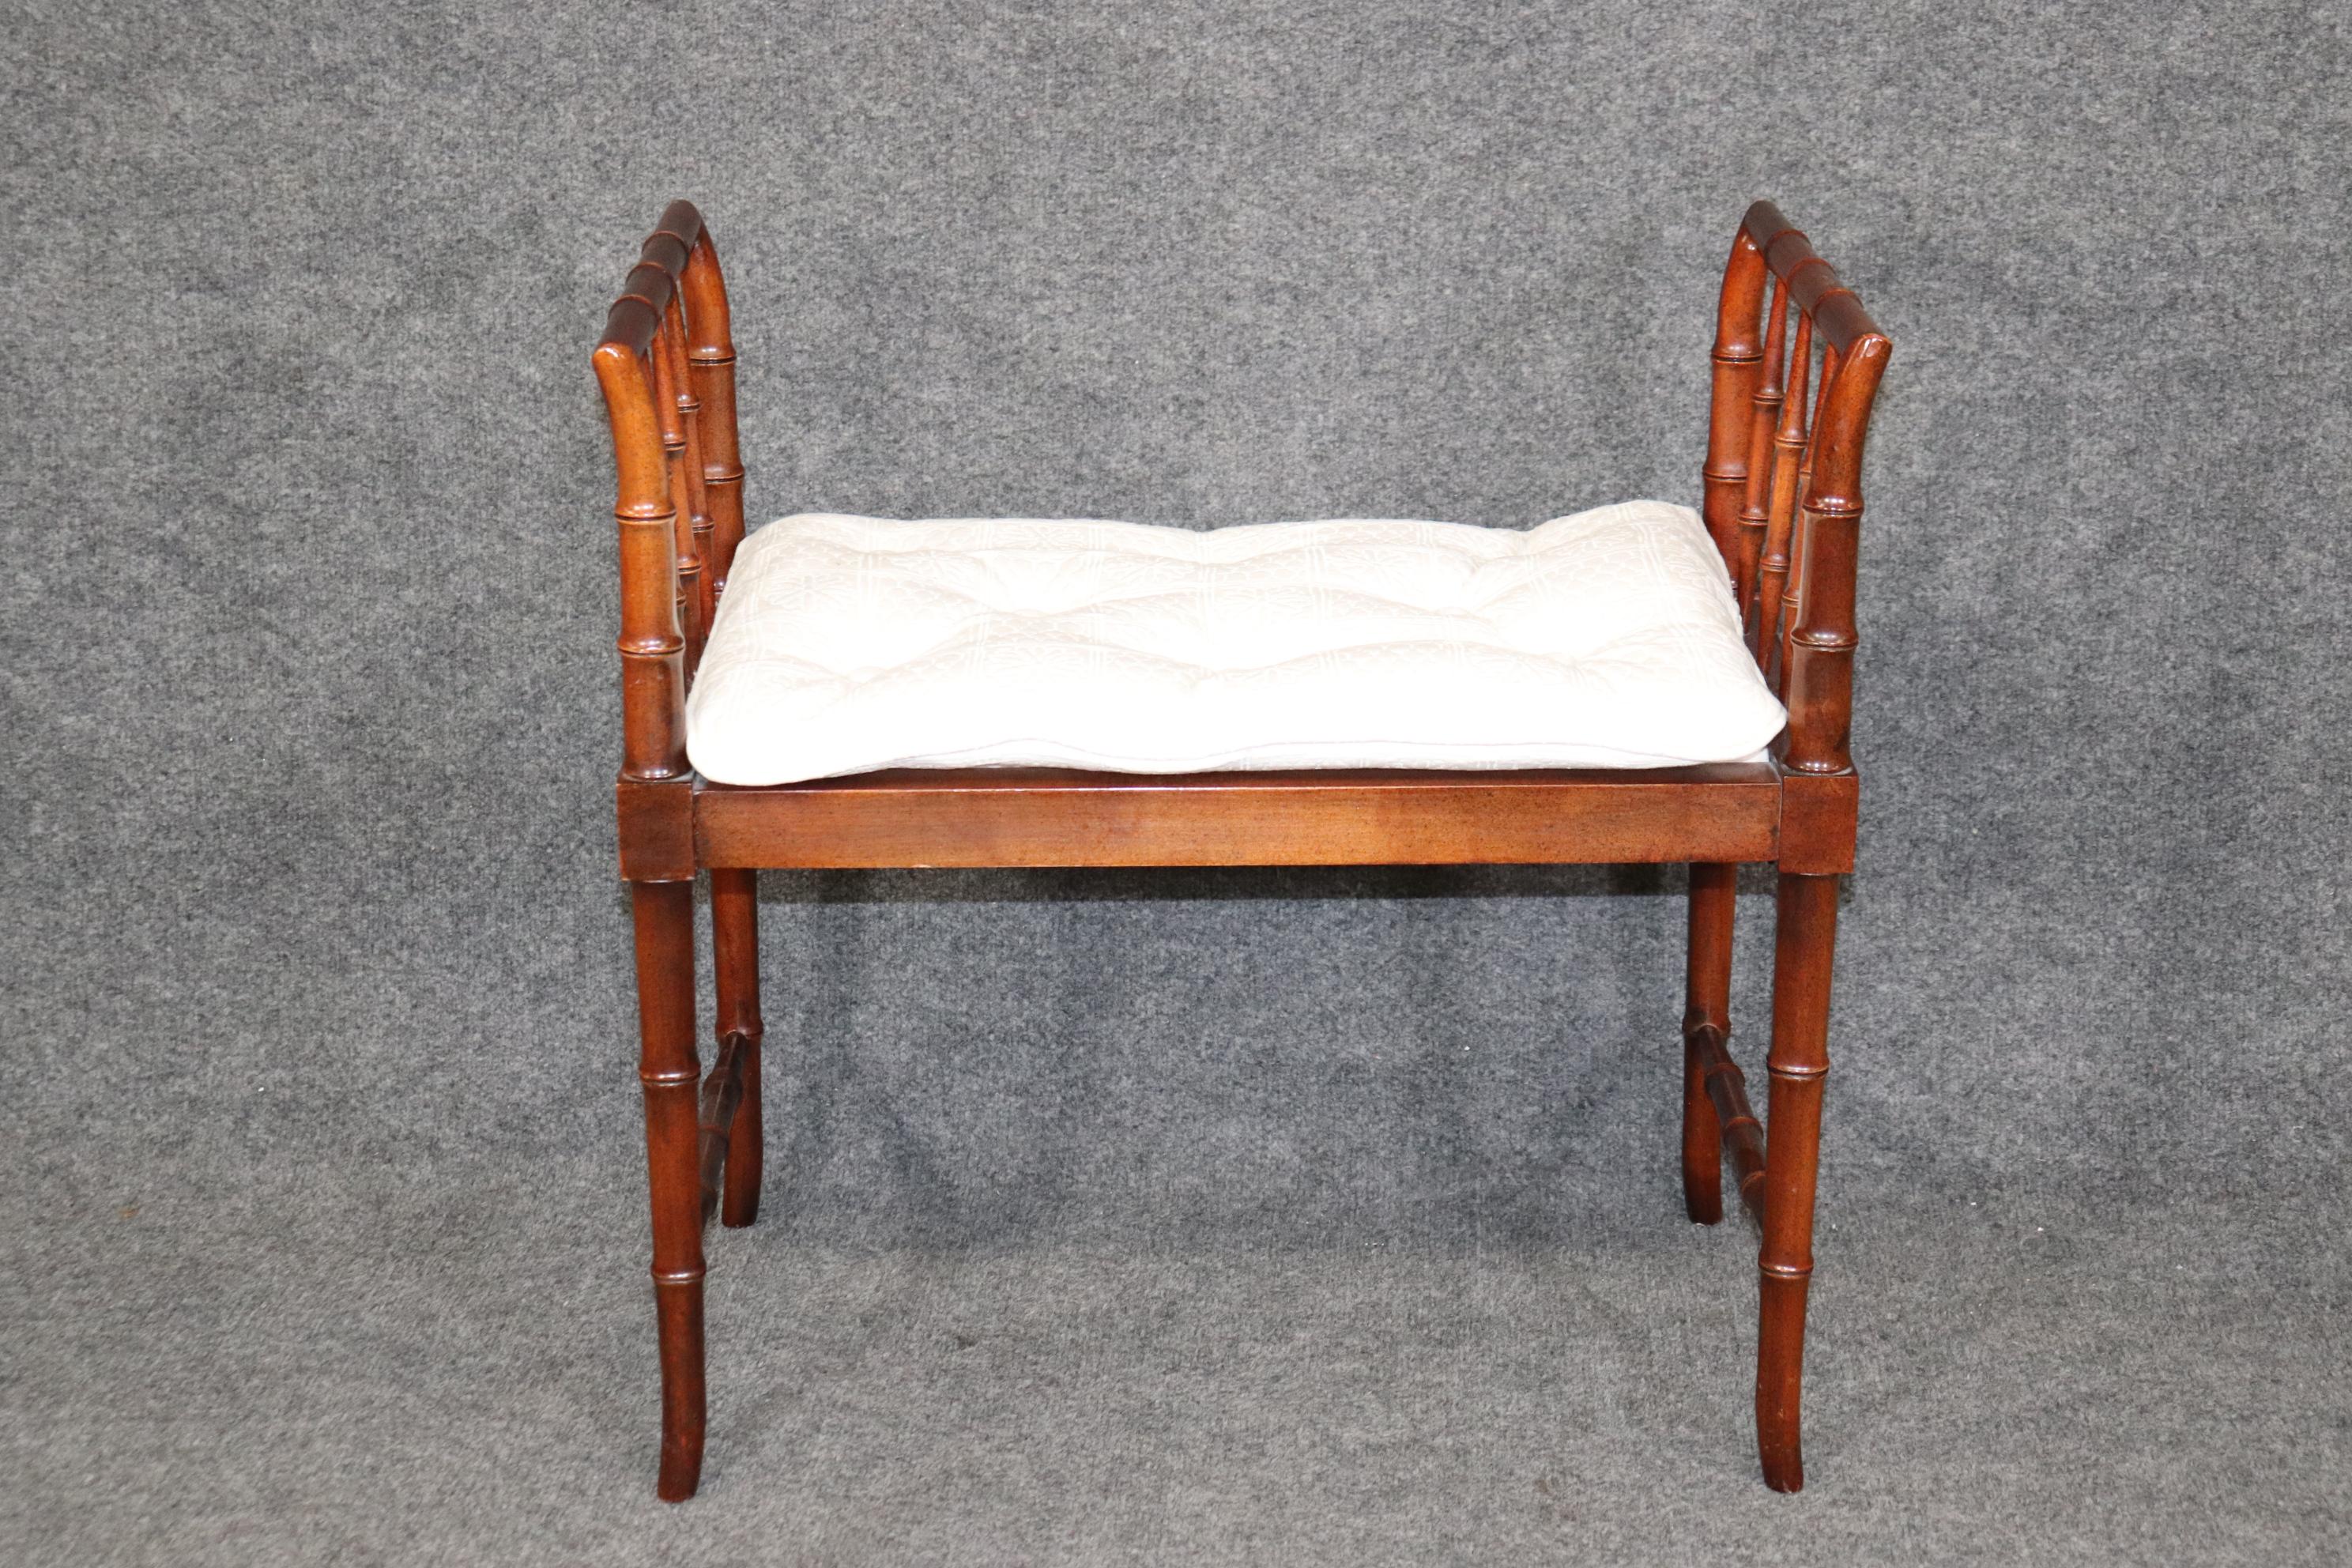 This is a beautifully made Baker French faux bamboo stool or bench. The bench is in good condition and has minor signs of age and wear but nothing significant. The upholstery is not new so it may have some minor stains or issues. The bench measures